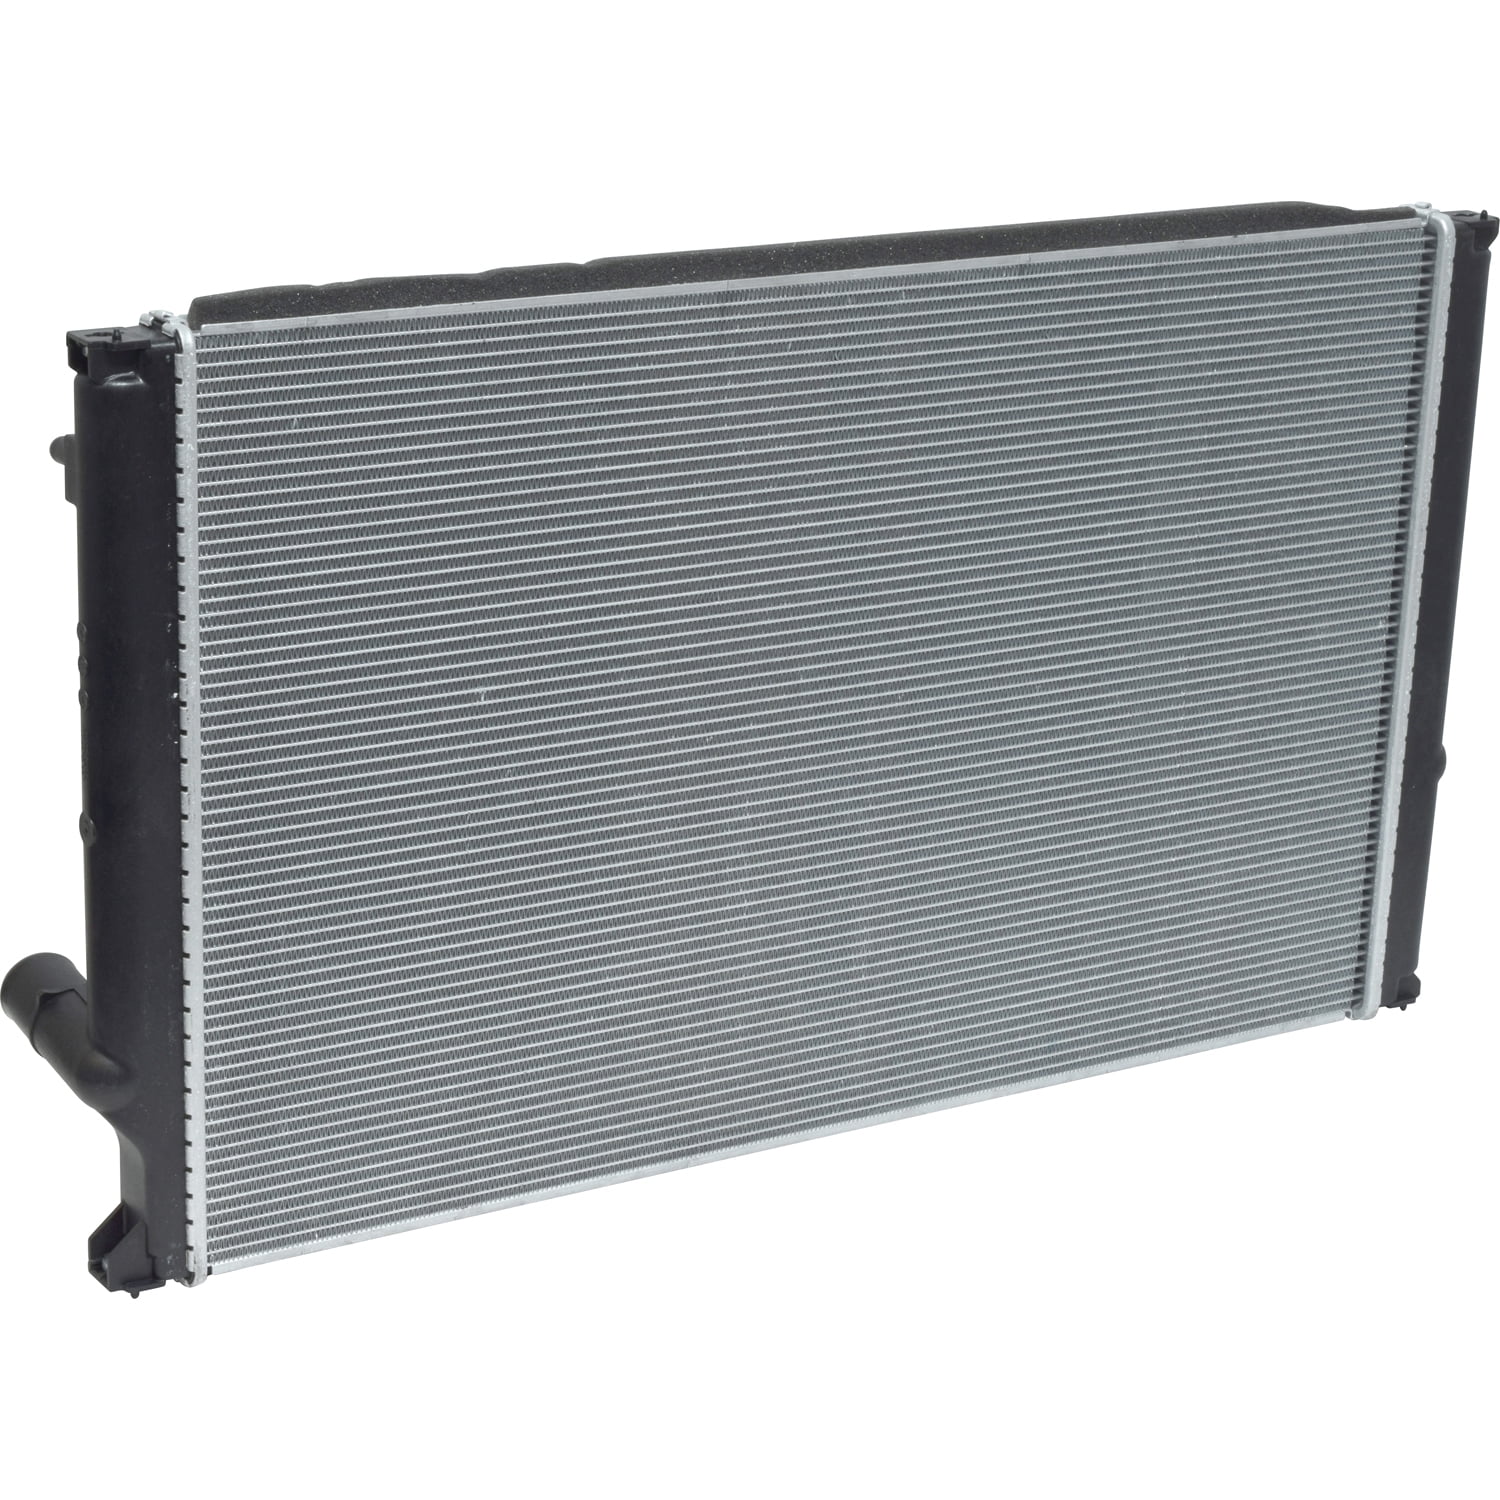 New Radiator for NX200t NX300